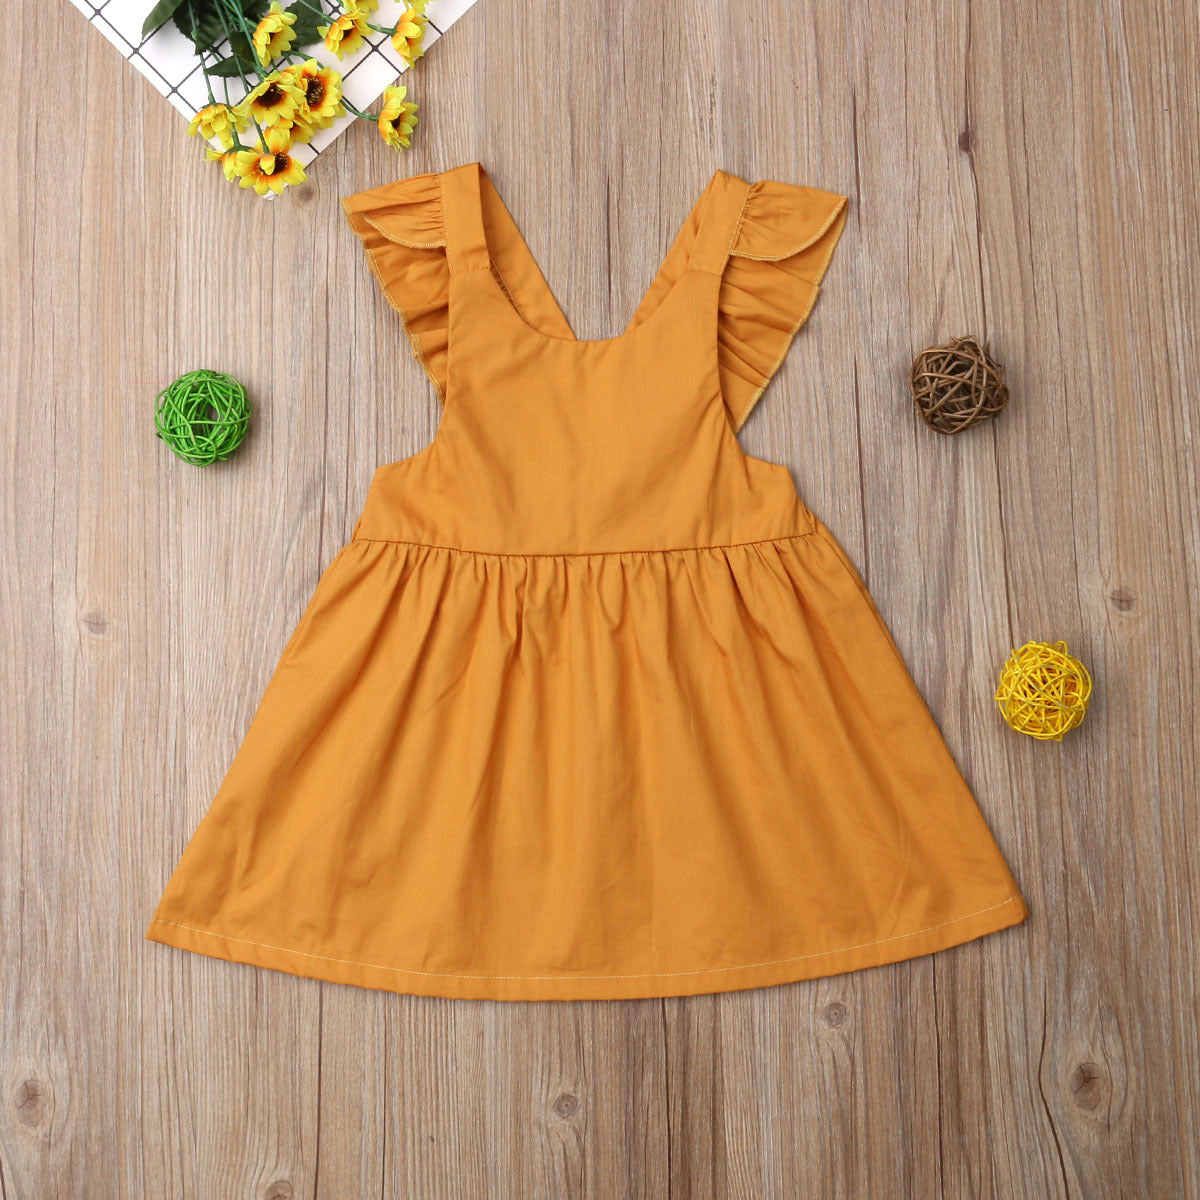 Cute Summer Dresses for Girls from Eternal Gleams.